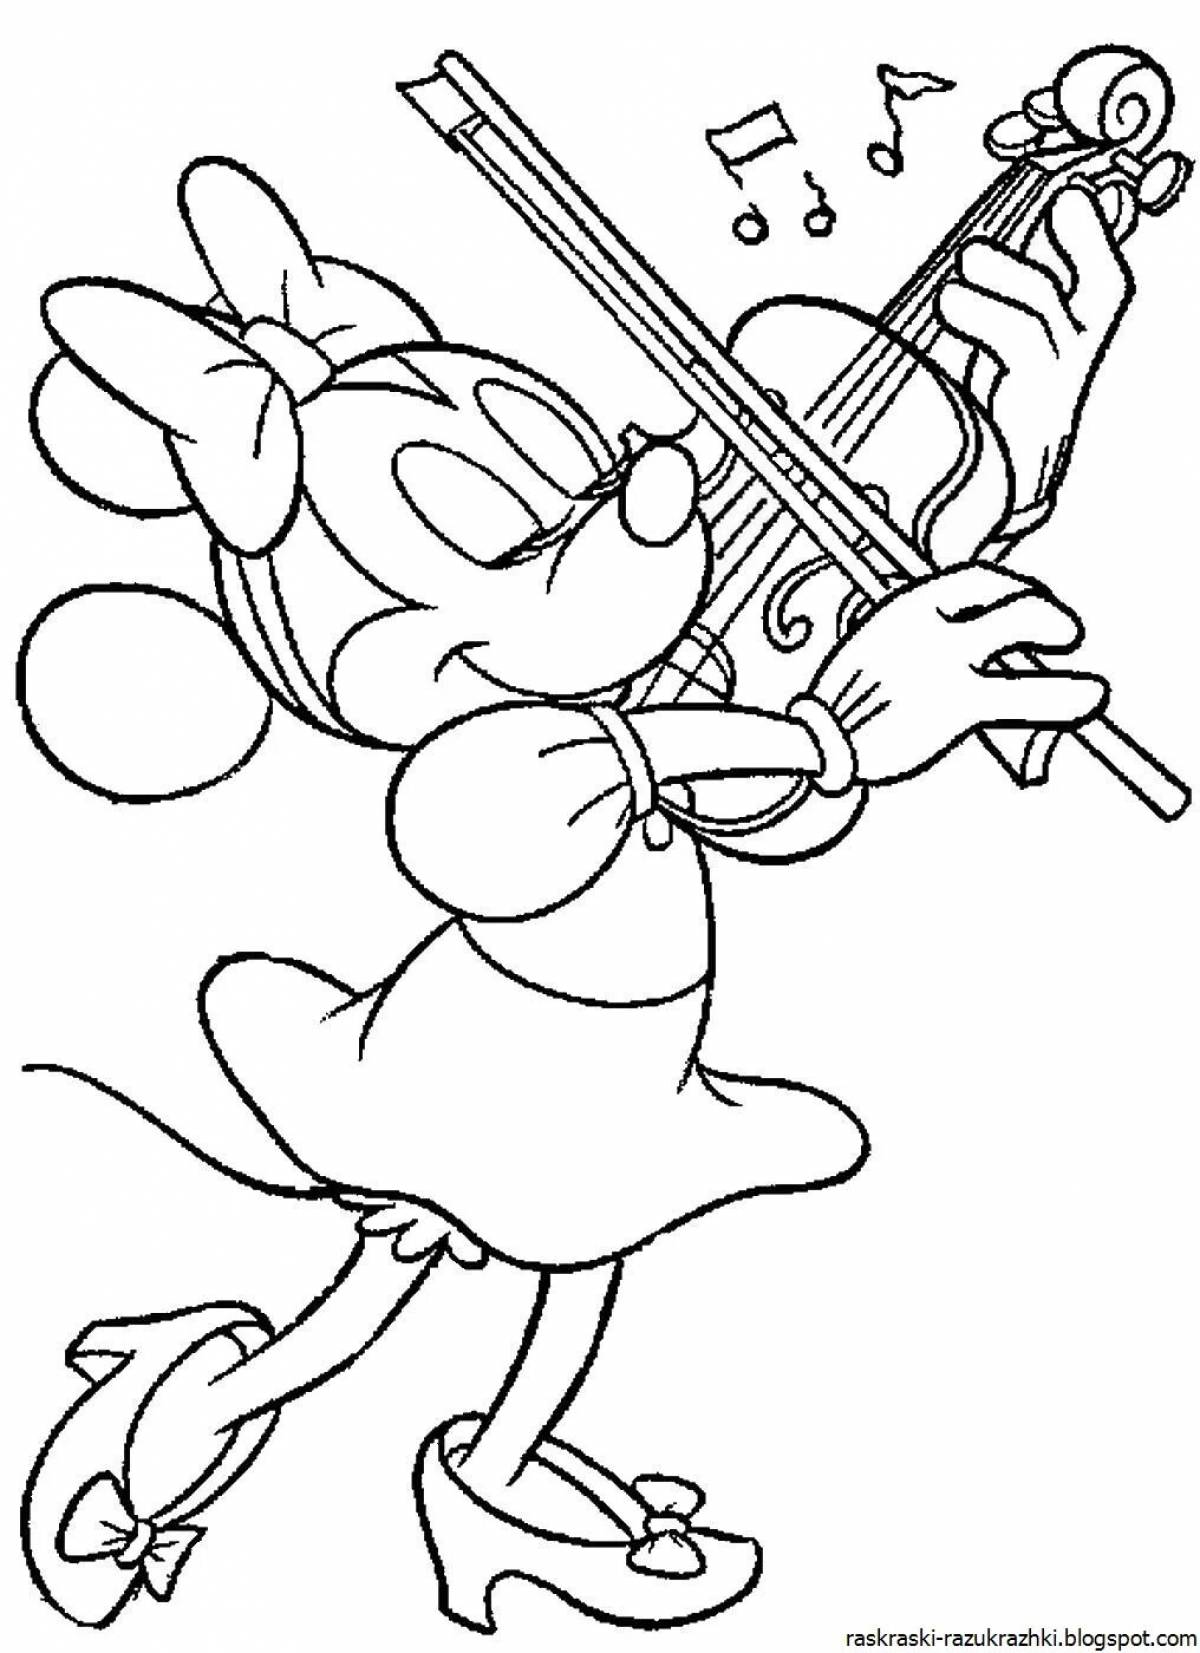 Tempting Violin Coloring Page for Preschoolers